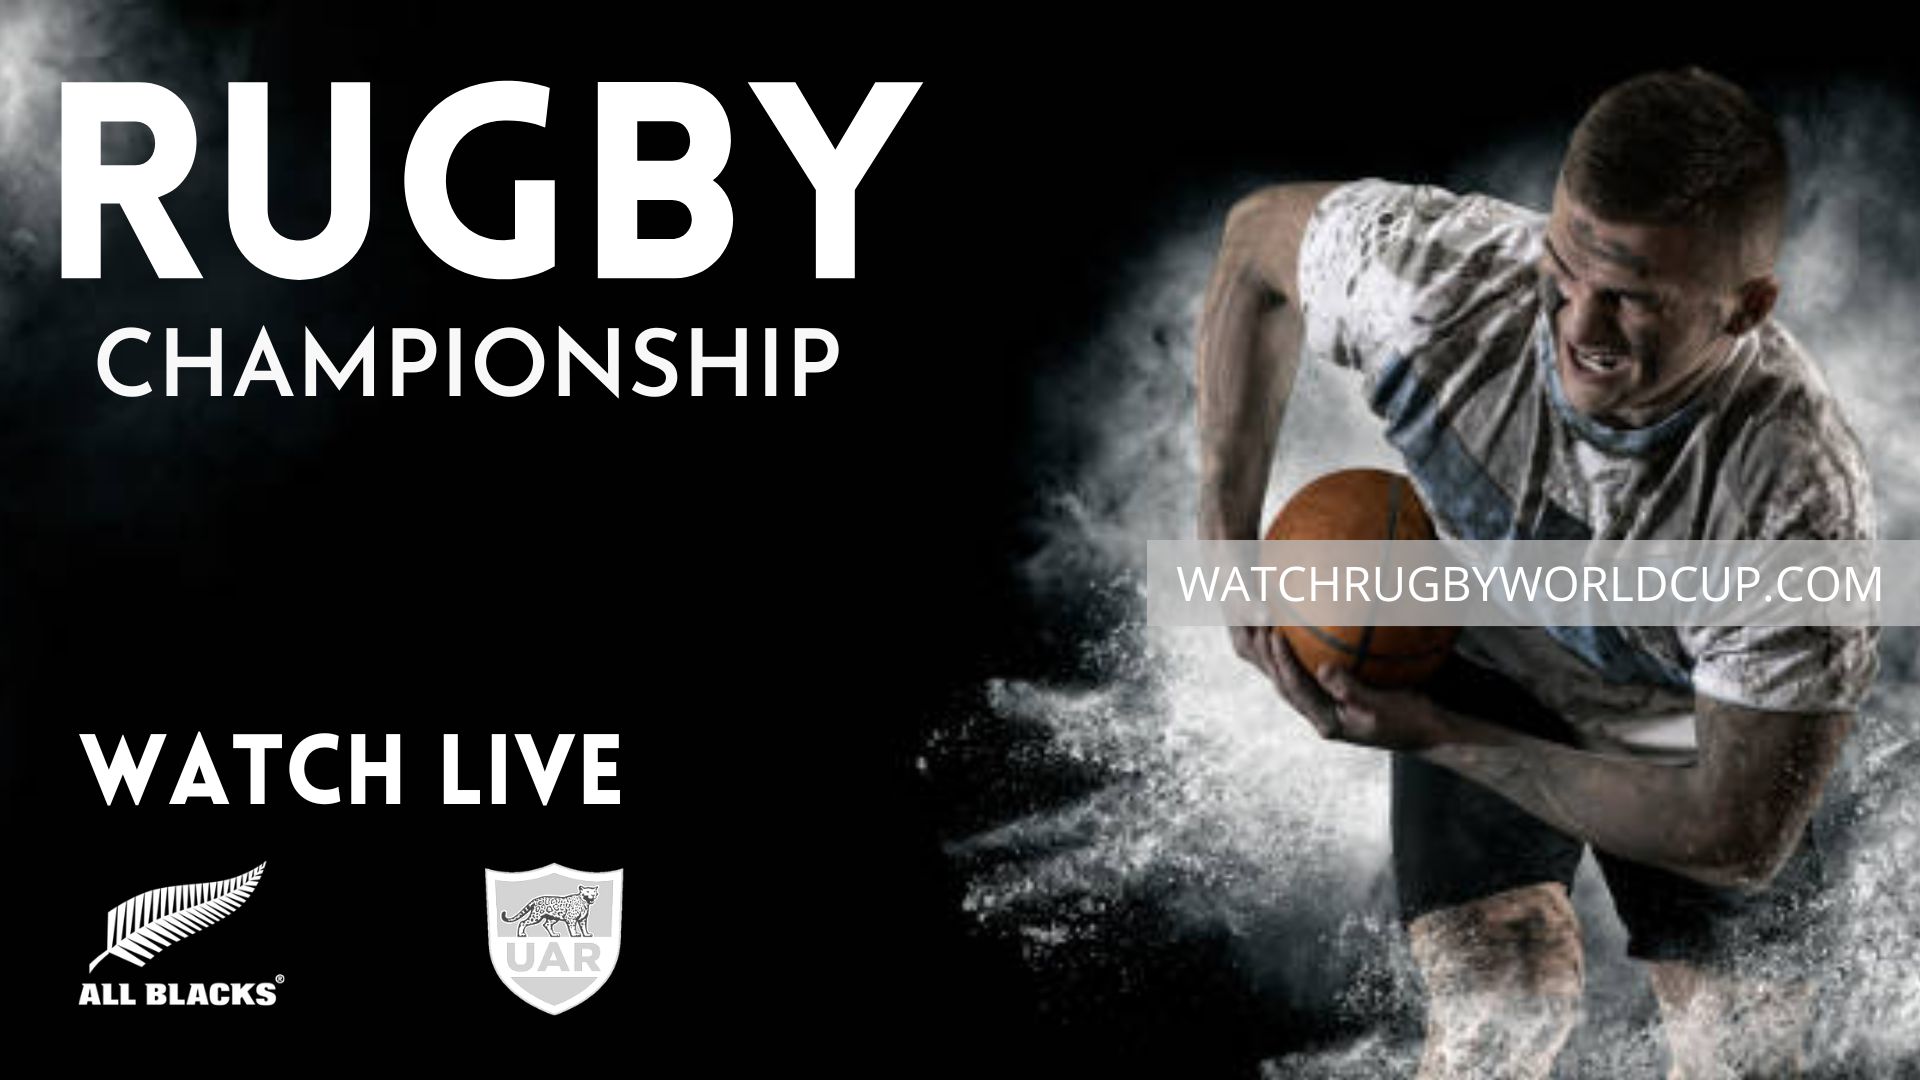 New Zealand Vs Argentina 3rd September Live Stream 2022 | Rugby Championship